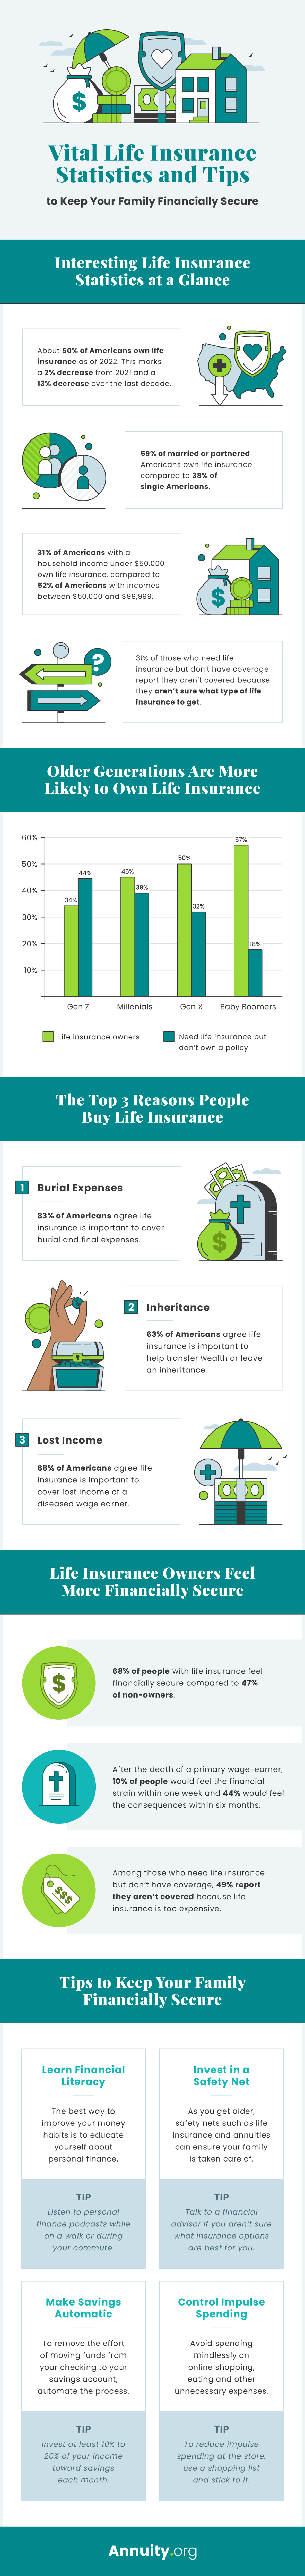 life-insurance-statistics-infographic.png